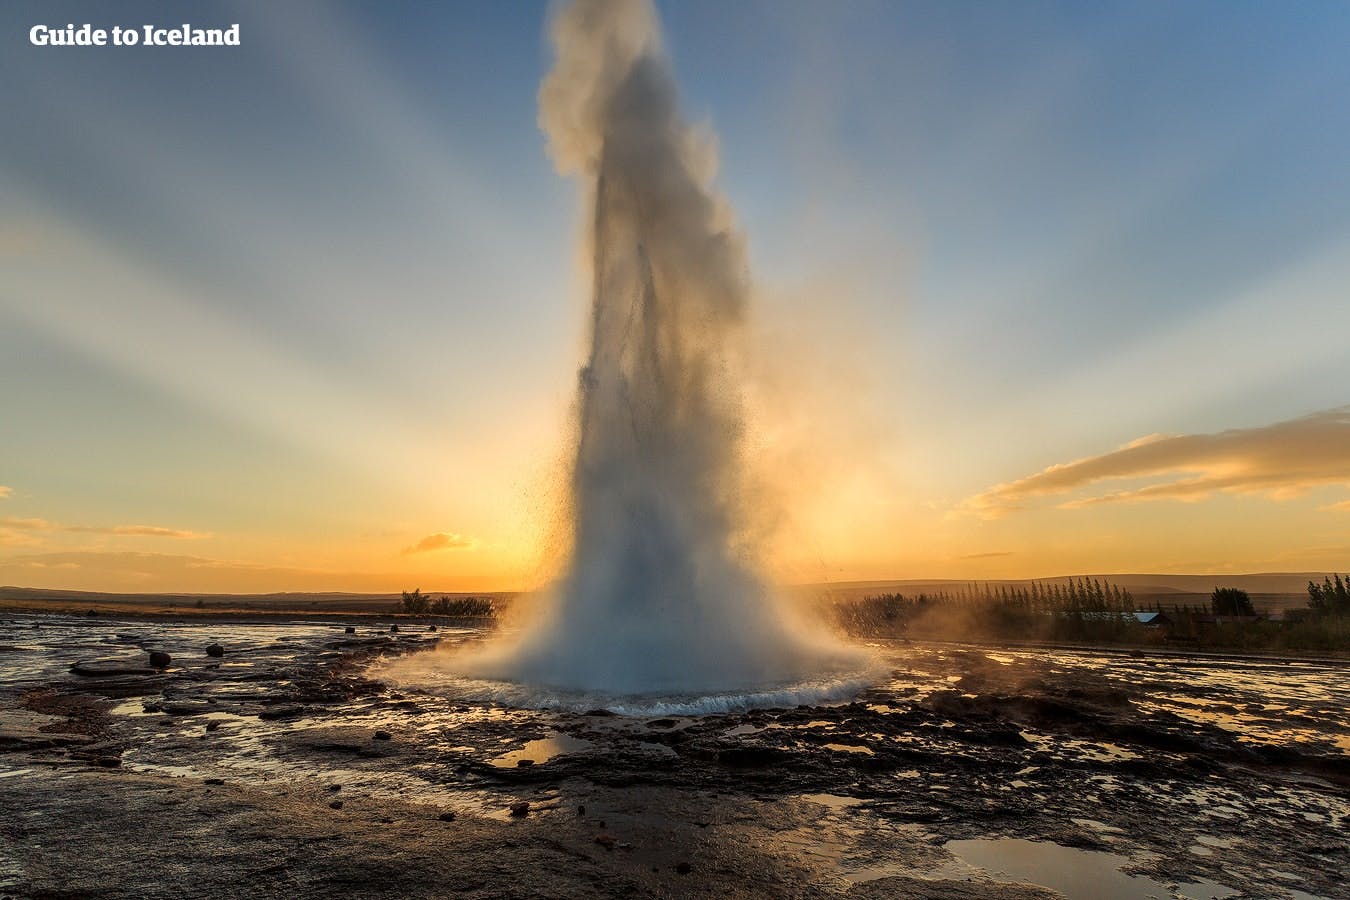 Water from the erupting Strokkur reaches for the sky.